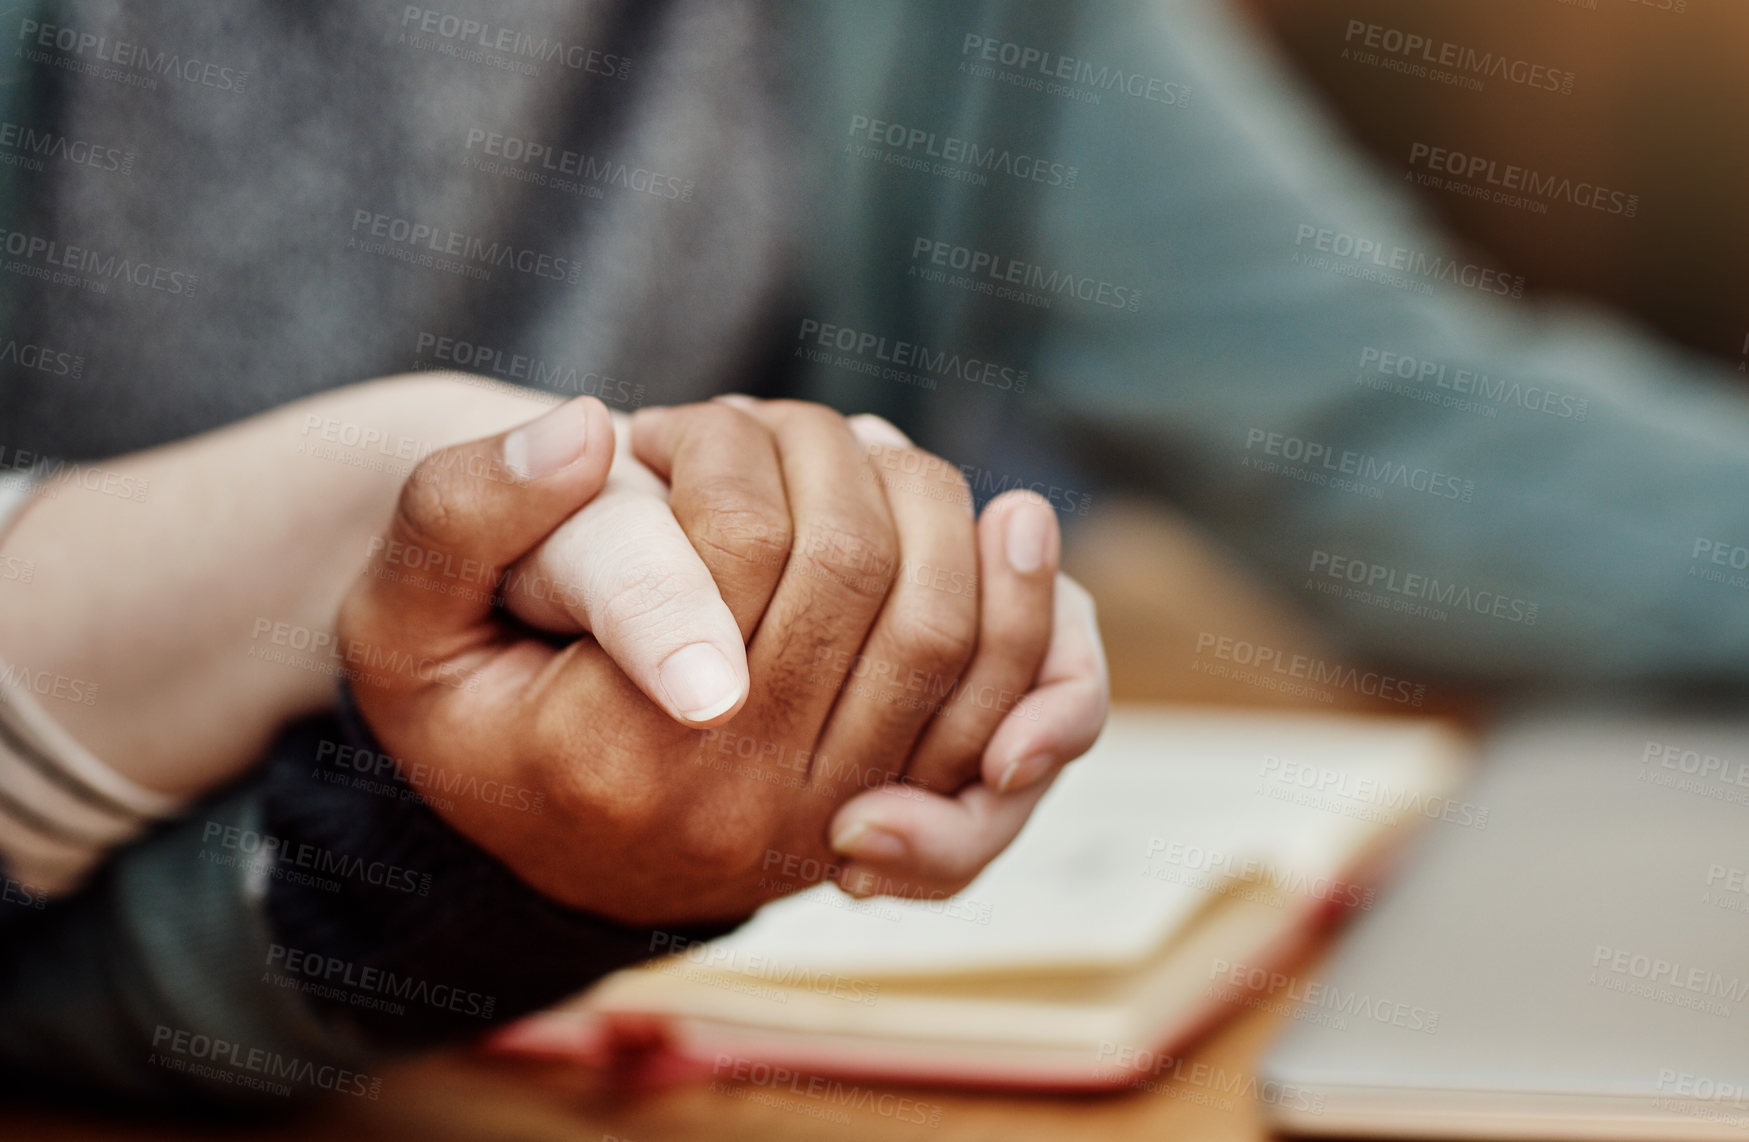 Buy stock photo Closeup shot of an unidentifiable group of university students holding hands in prayer